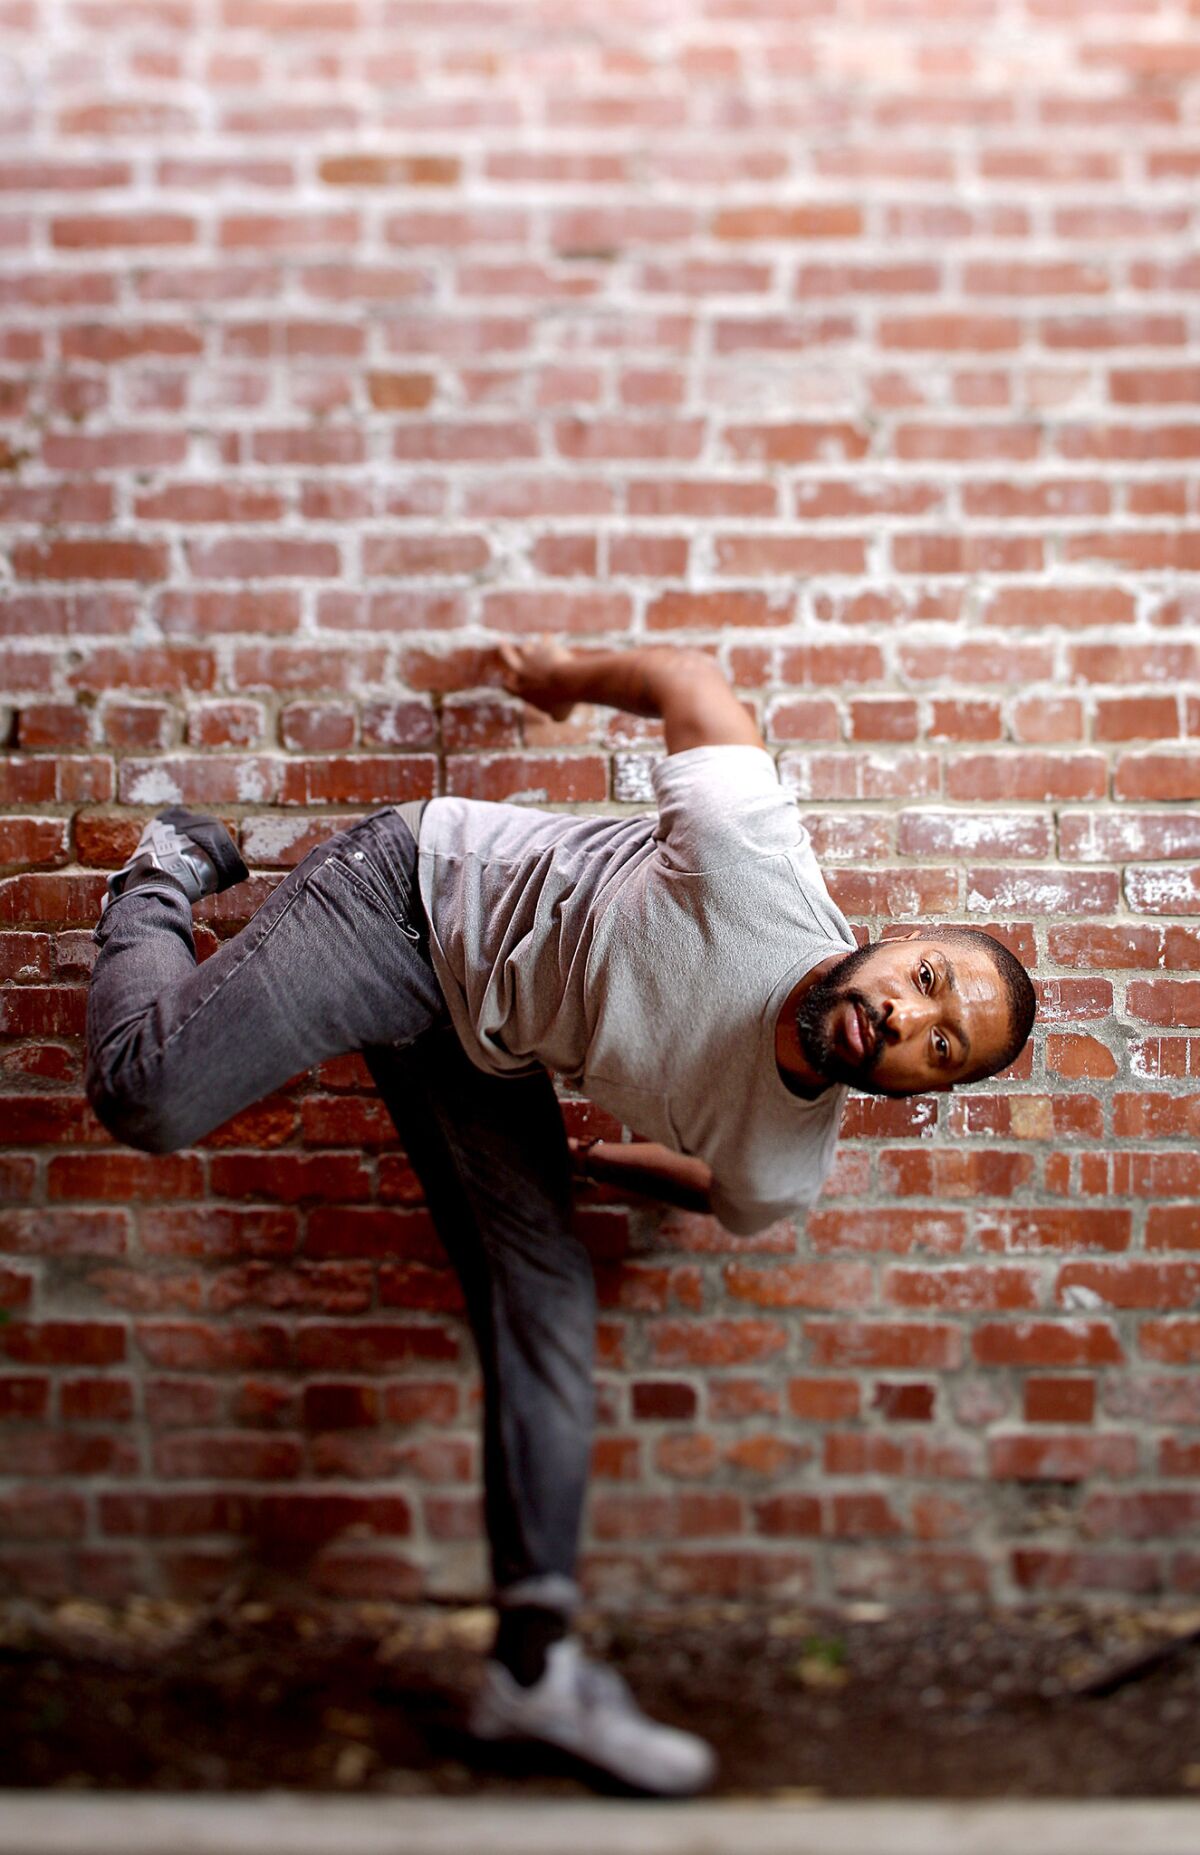 Choreographer Kyle Abraham found a brick wall in Eagle Rock to strike his pose.